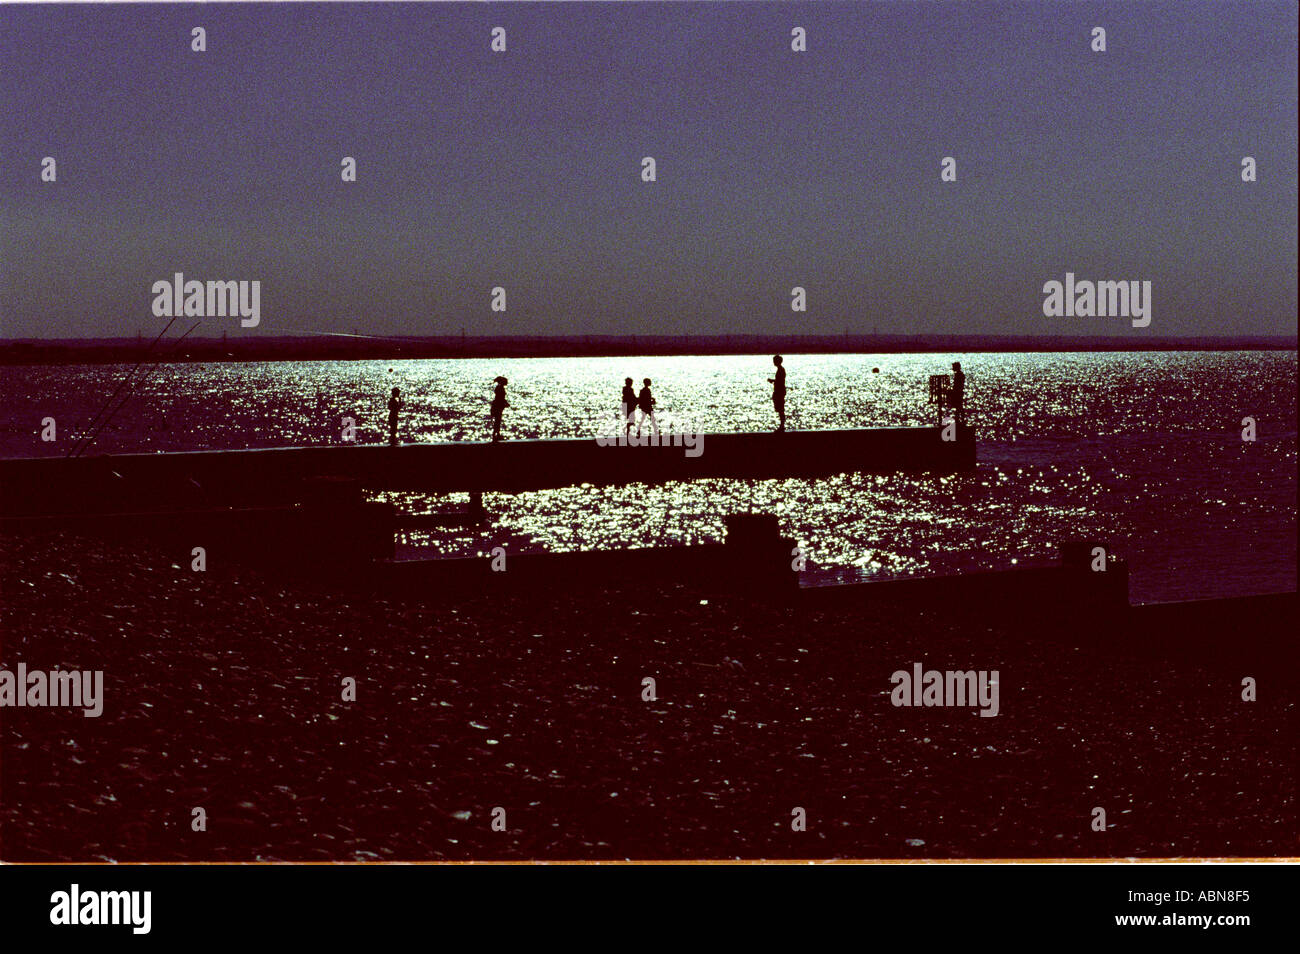 silhouettes on jetty Stock Photo